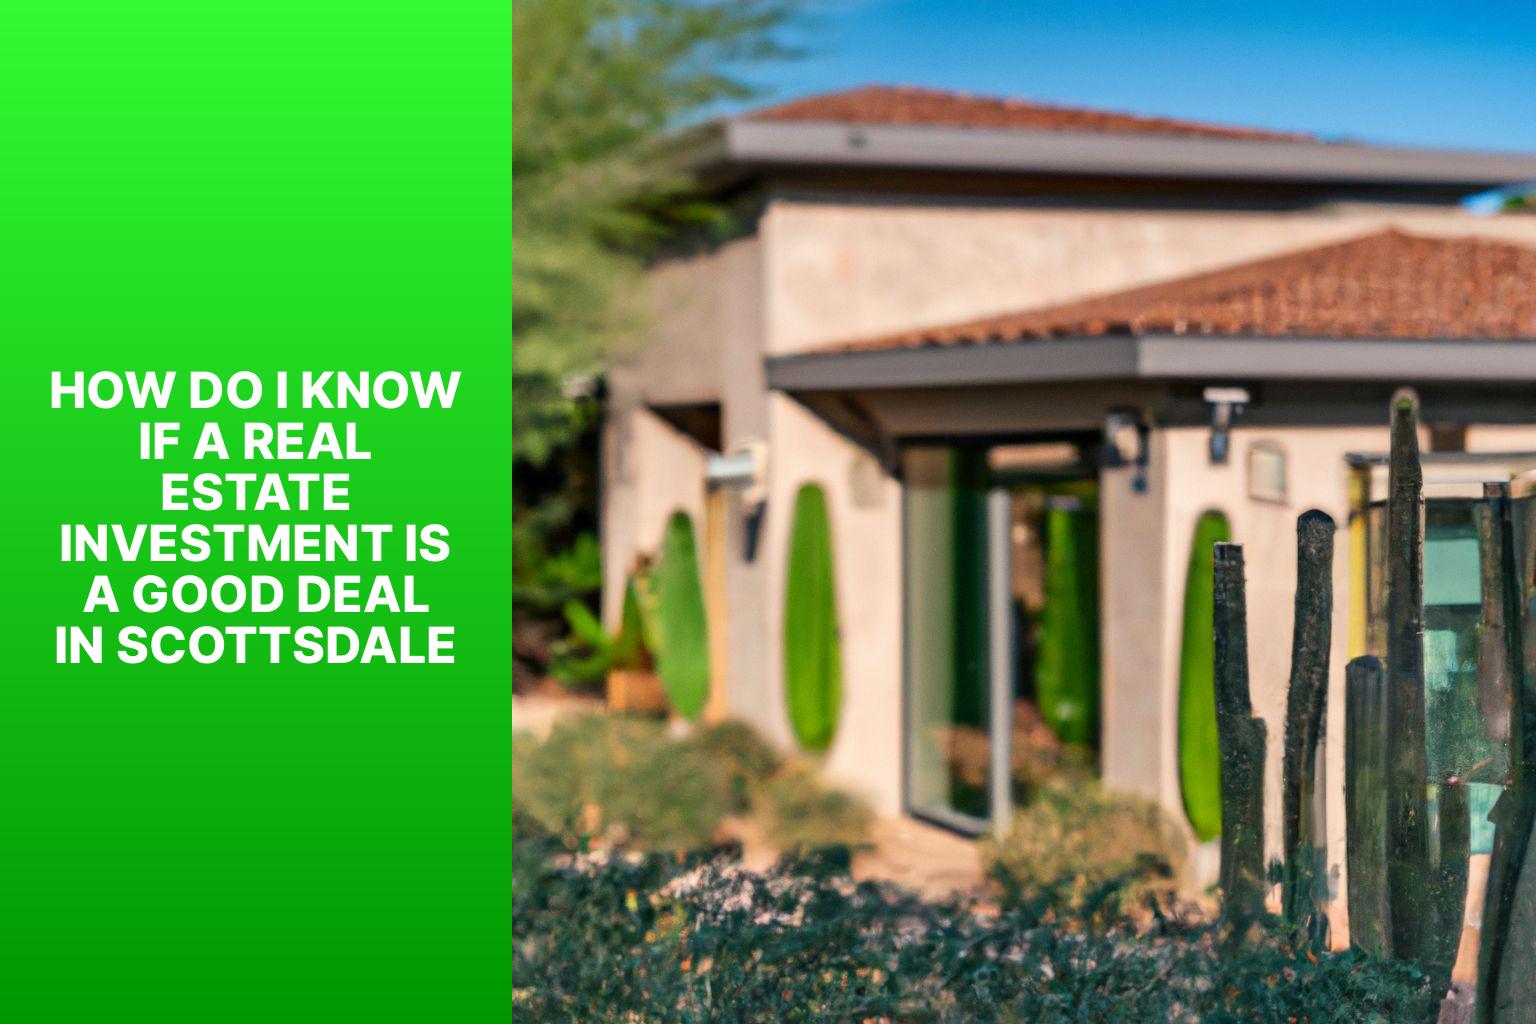 How do I know if a real estate investment is a good deal in Scottsdale